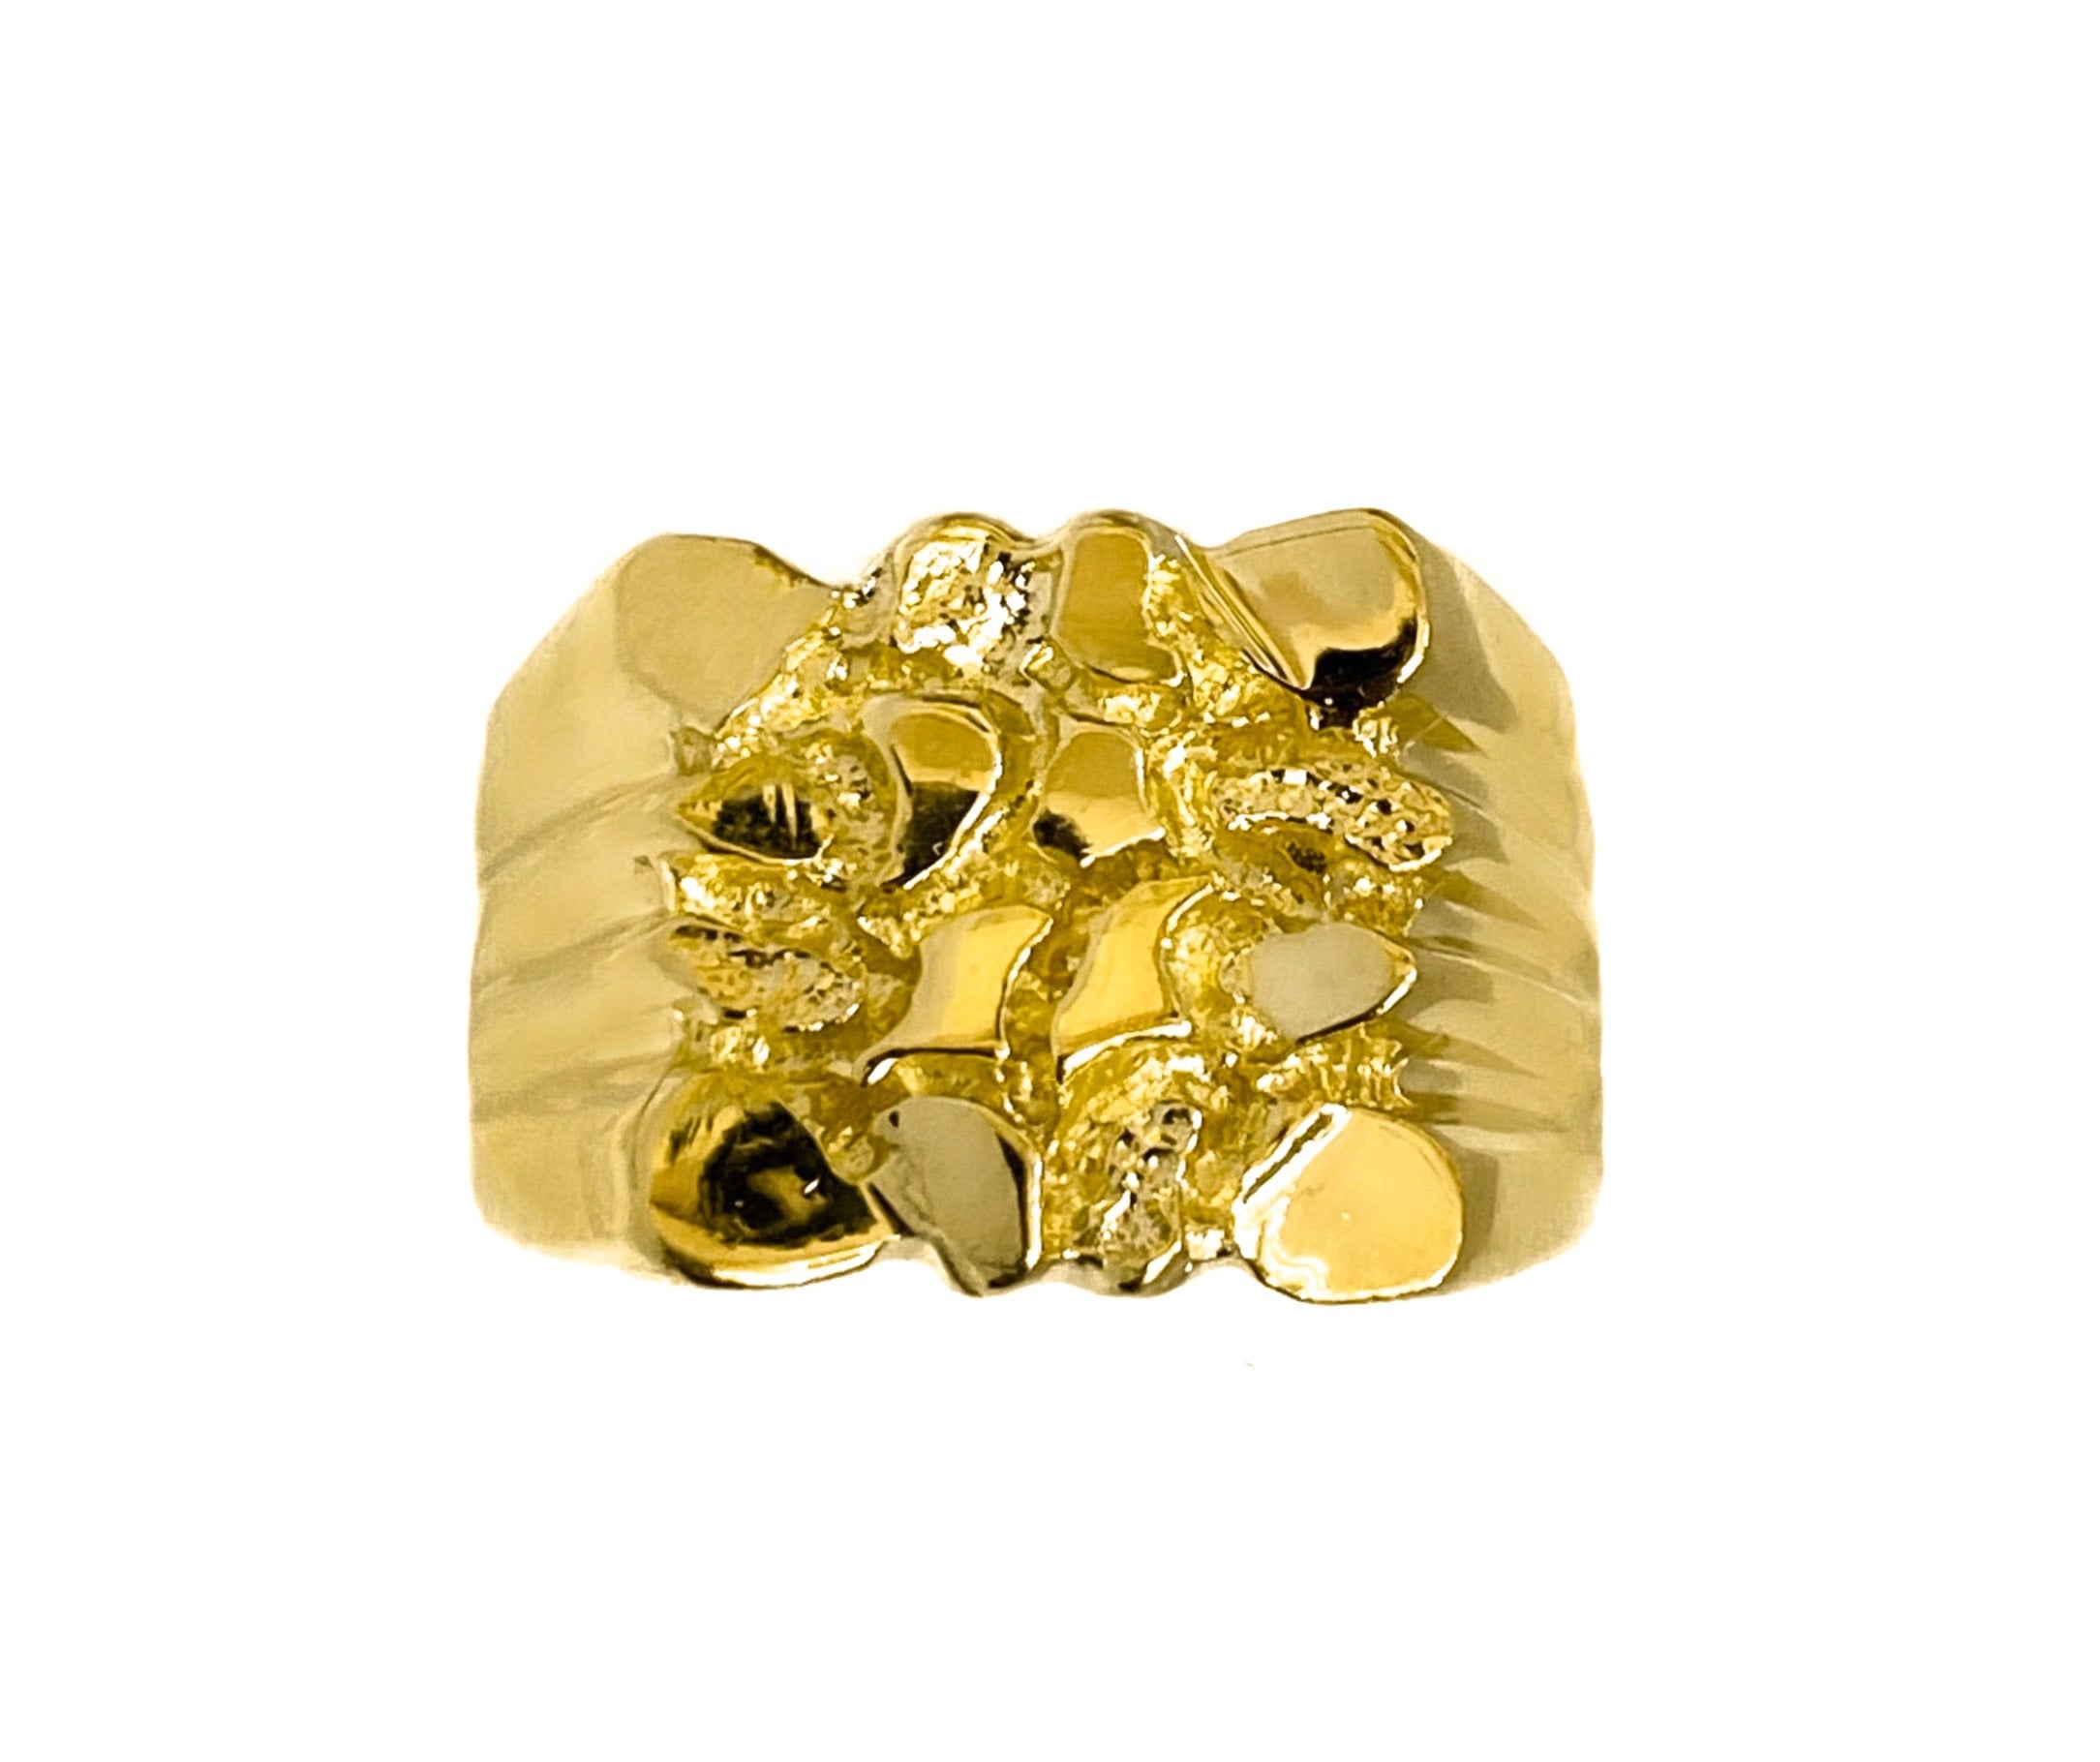 14K YELLOW GOLD NUGGET SQUARE RING